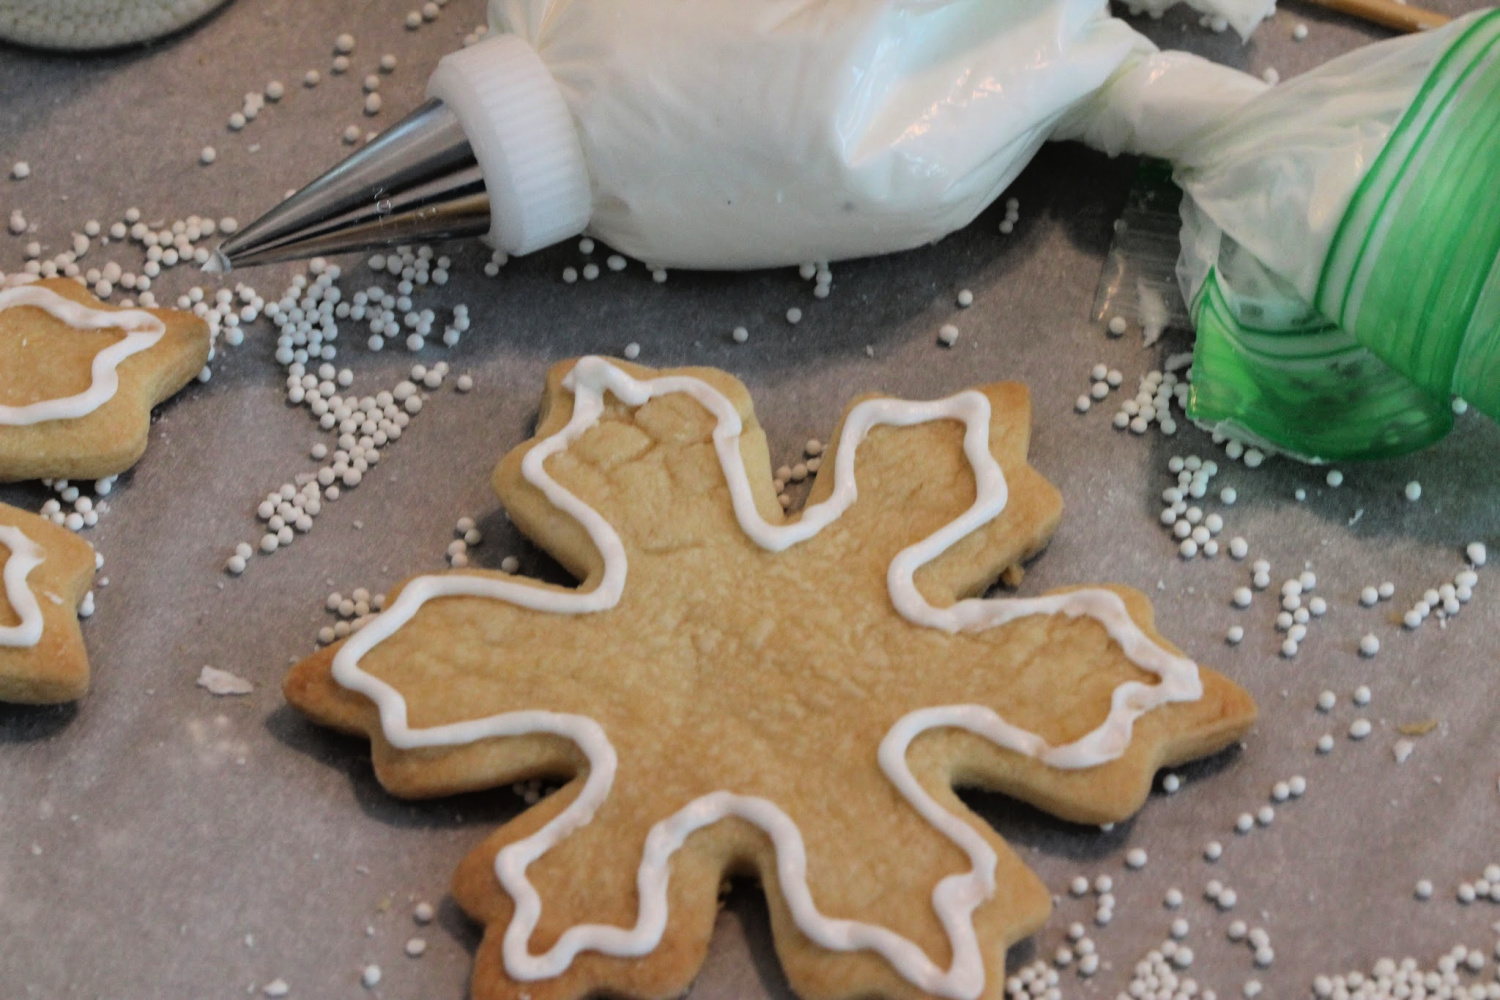 this week’s bake – sugar cookies (and my first attempt at royal icing)